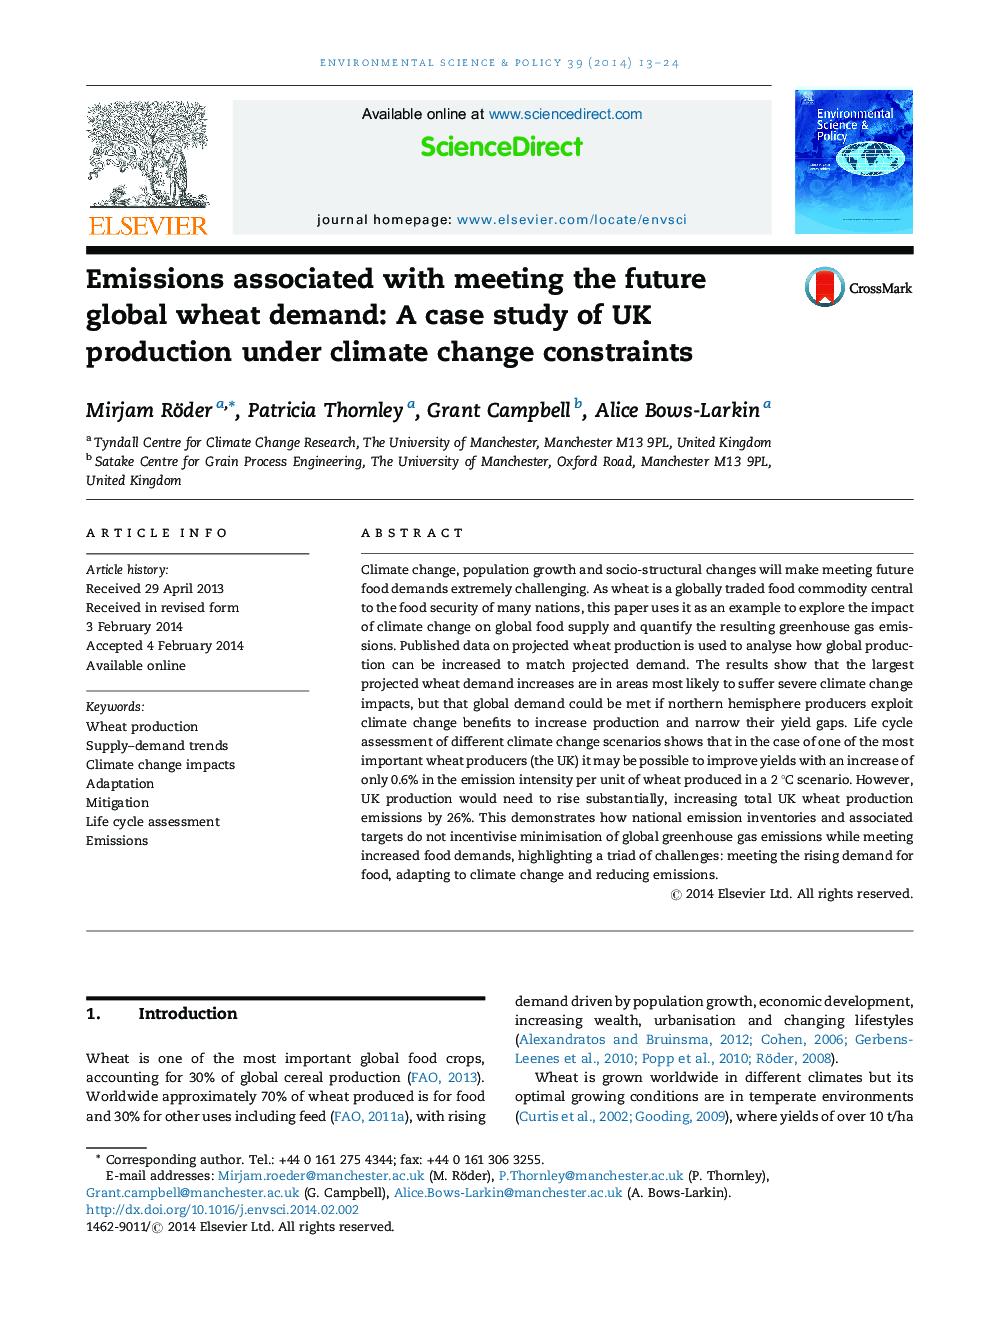 Emissions associated with meeting the future global wheat demand: A case study of UK production under climate change constraints